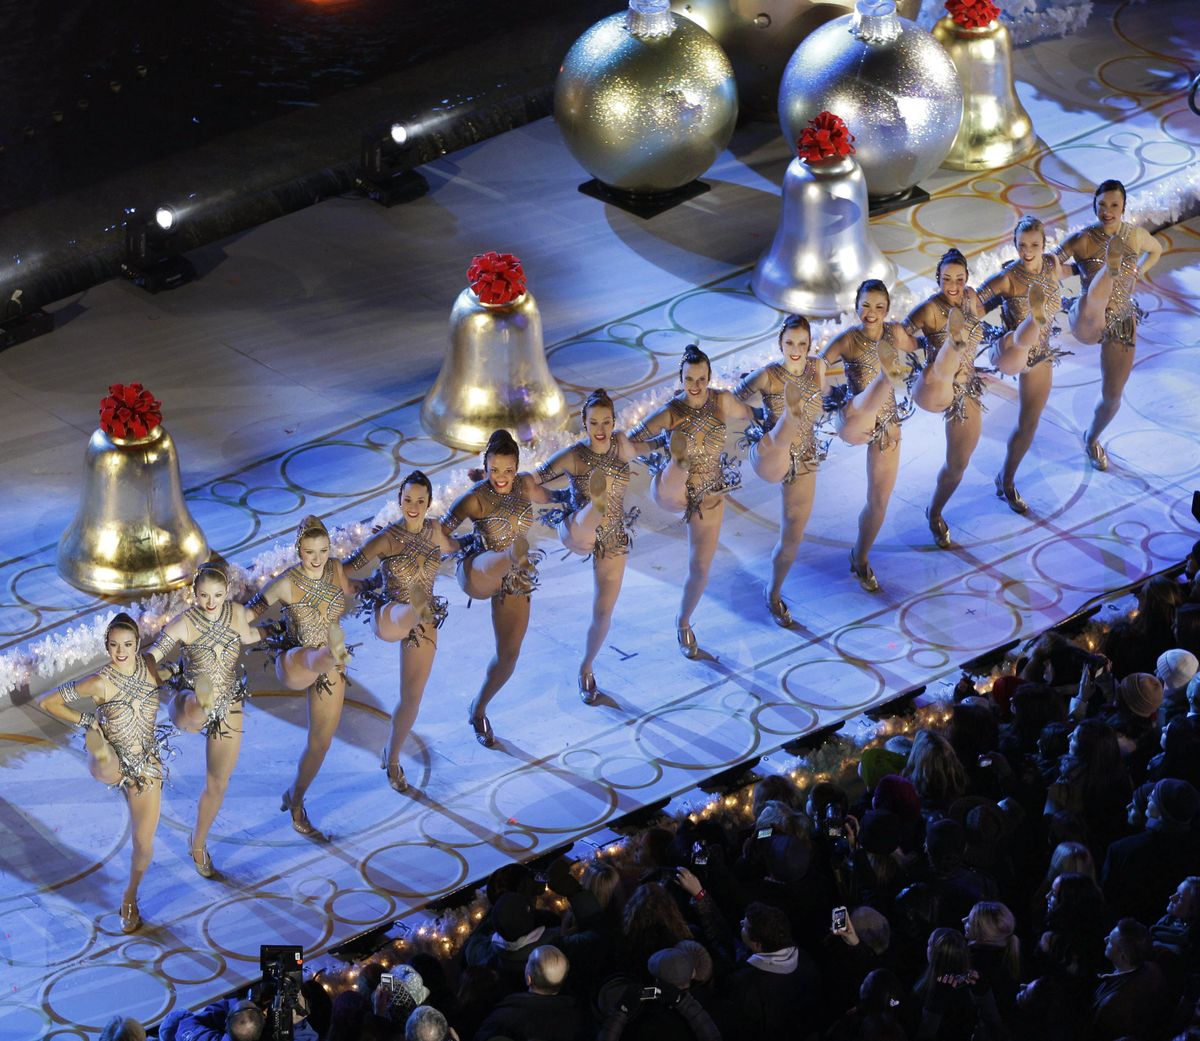 The Radio City Music Hall Rockettes perform before the Rockefeller Center Christmas Tree is lit during the 80th annual tree lighting ceremony at Rockefeller Center in New York, Wednesday, Nov. 28, 2012. (Kathy Willens / Associated Press)